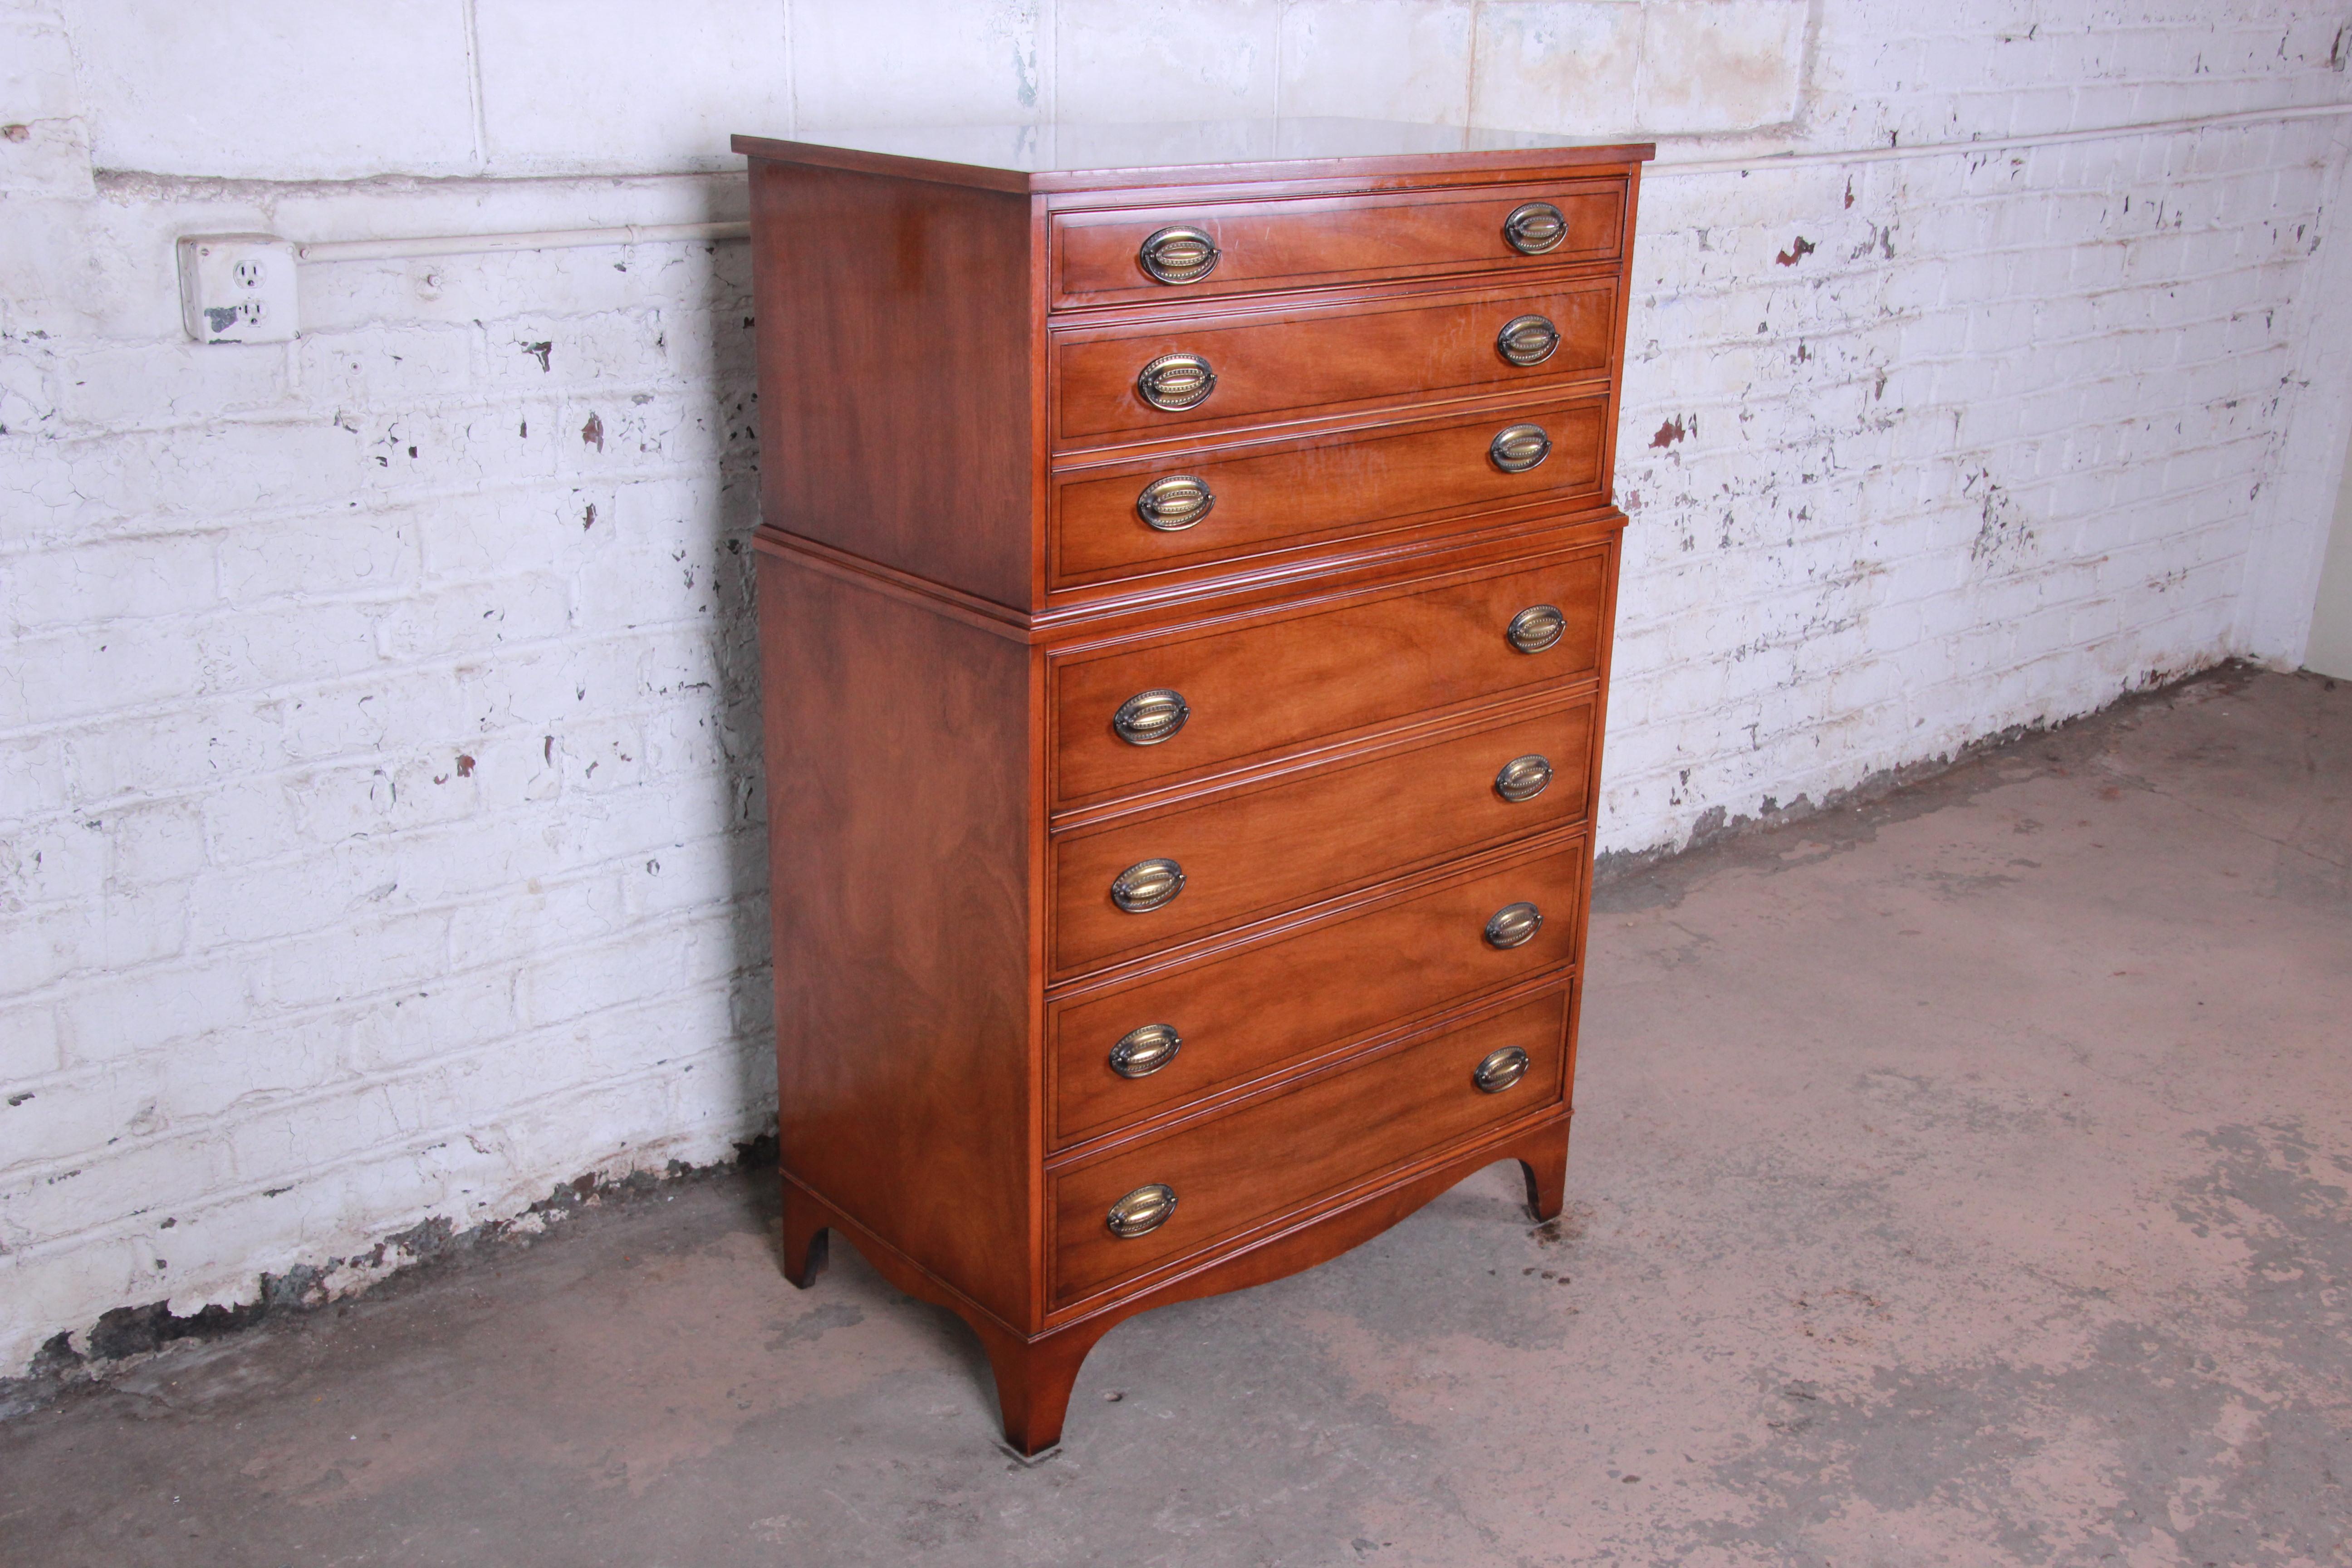 A gorgeous inlaid mahogany highboy dresser by Heritage Henredon. The dresser features stunning mahogany wood grain and a nice traditional style. It offers ample storage, with four dovetailed drawers and two drop-down compartments each with three